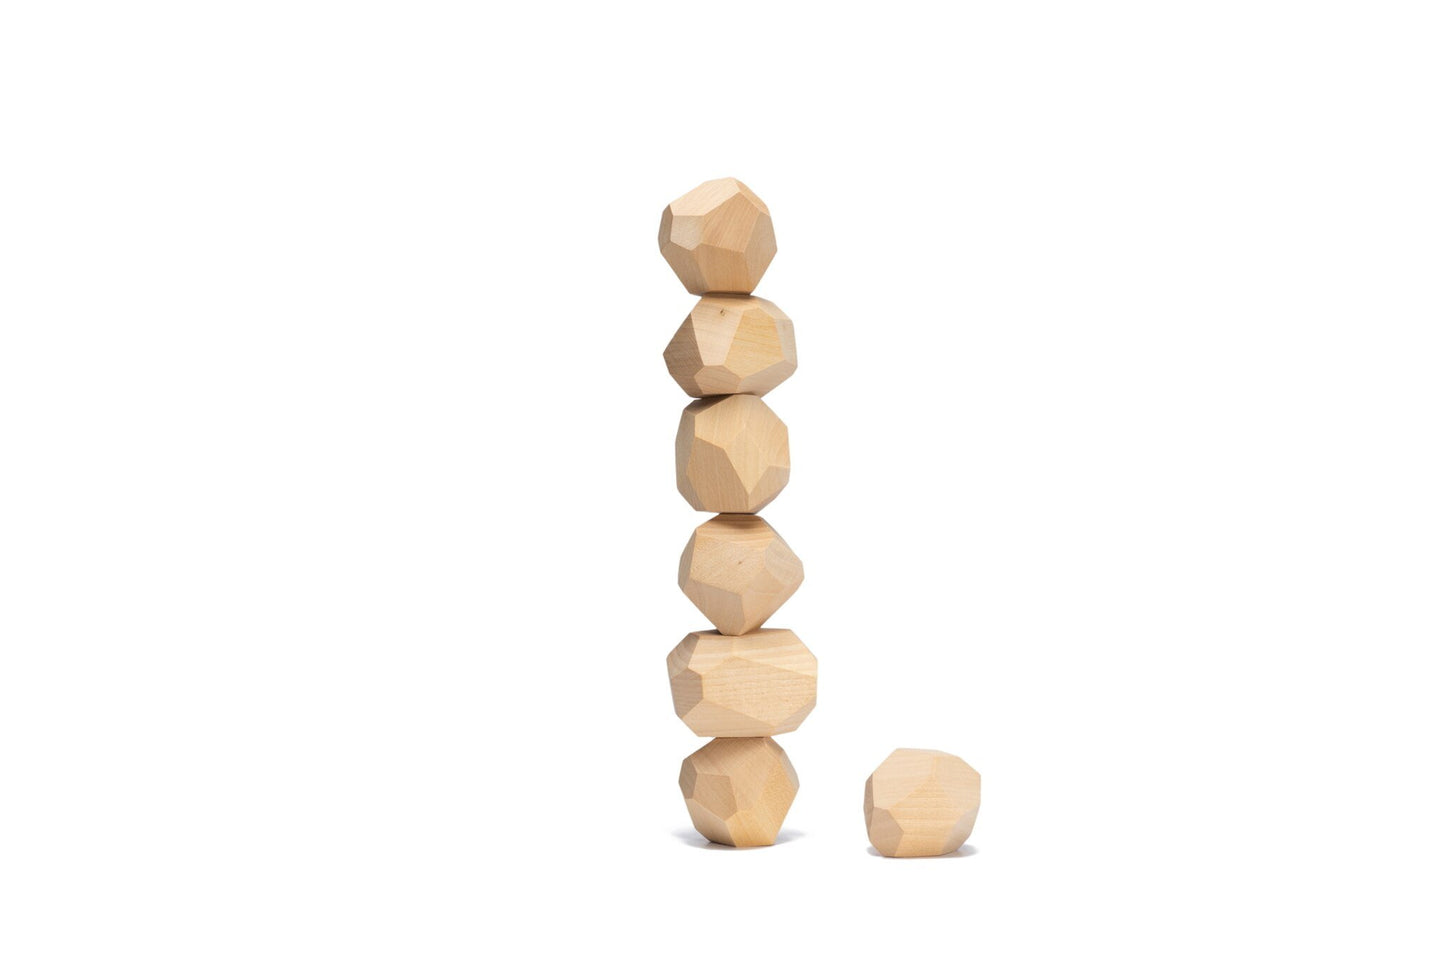 Ocamora 'Teniques' Stacking Stones - Natural (7 pieces) - Wood Wood Toys Canada's Favourite Montessori Toy Store